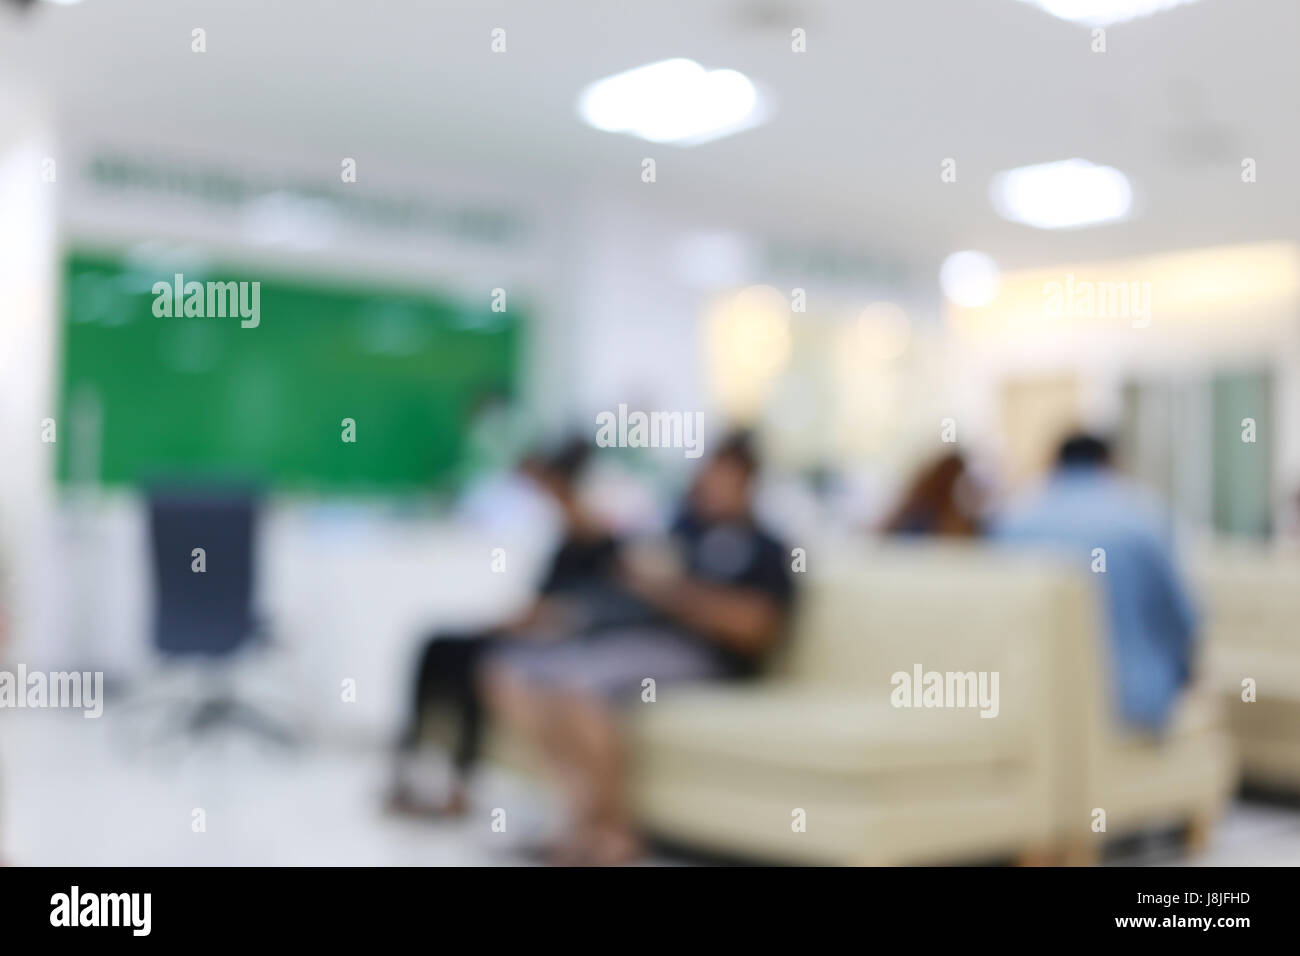 Background image of a hospital blur for design backdrop to work or Presentation. Stock Photo